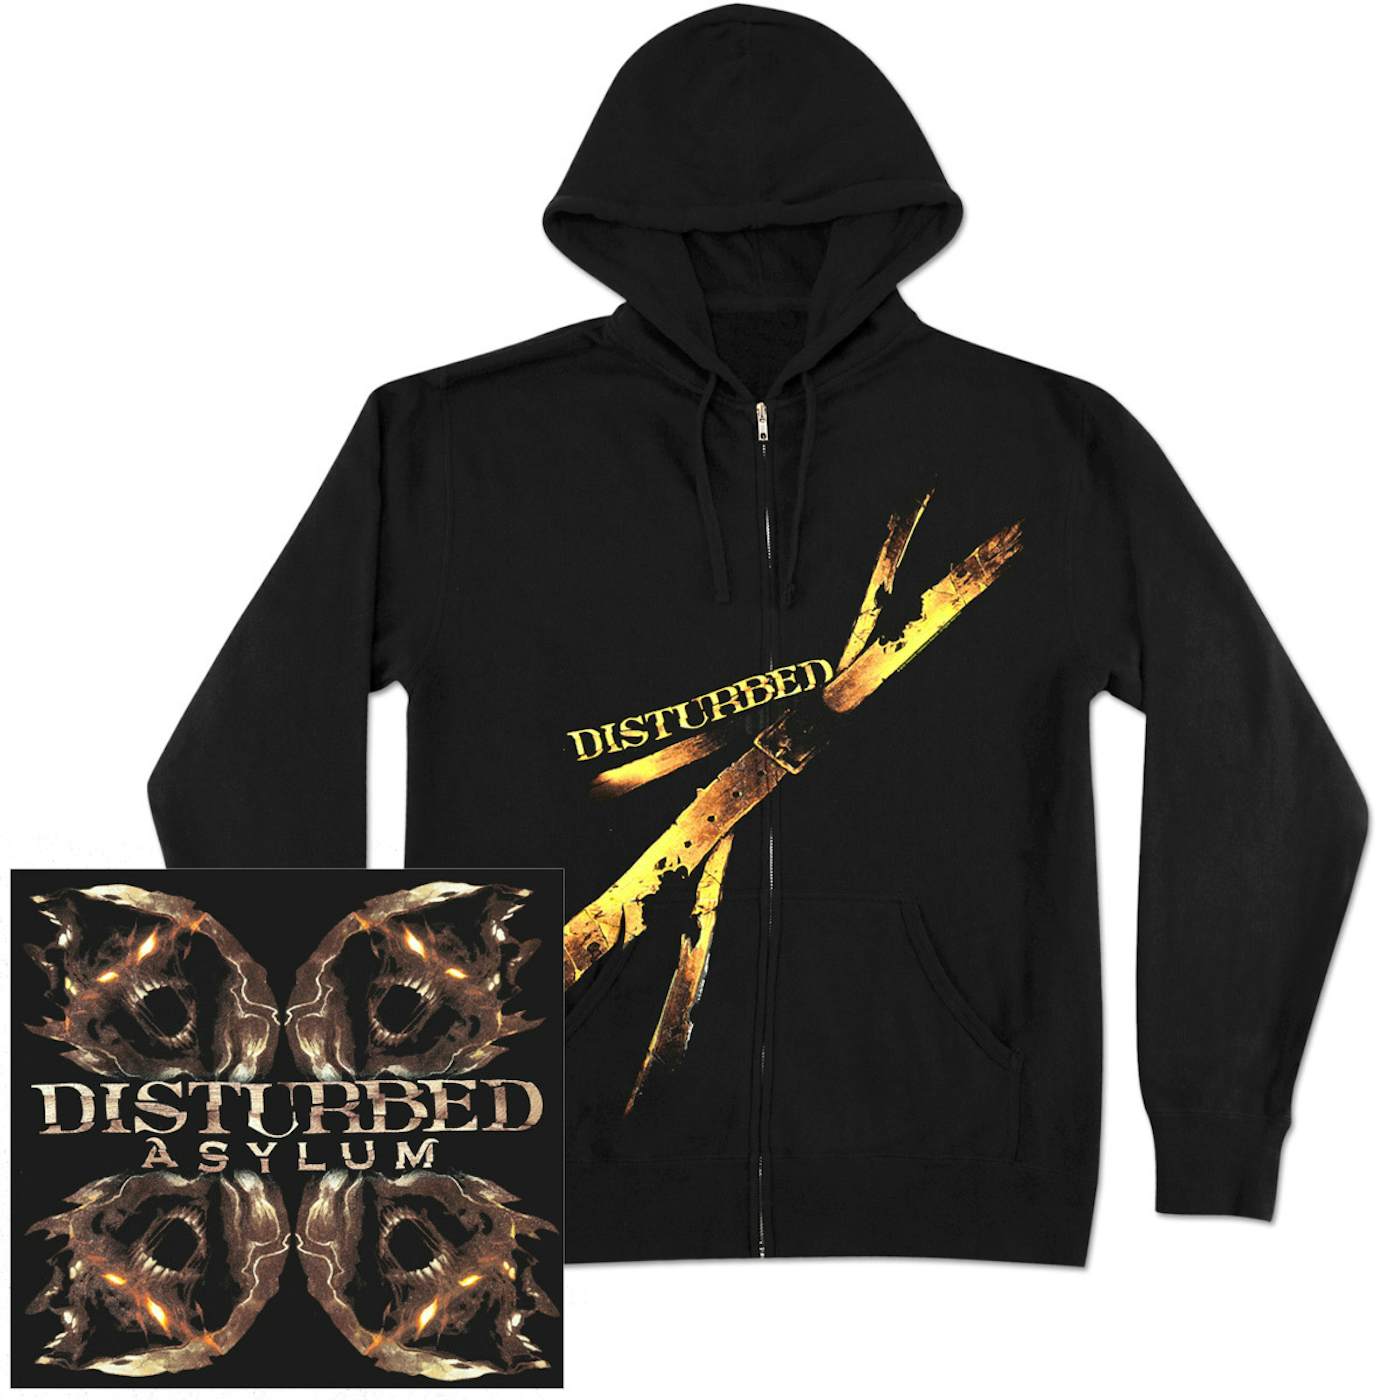 Disturbed Strapped Hoodie